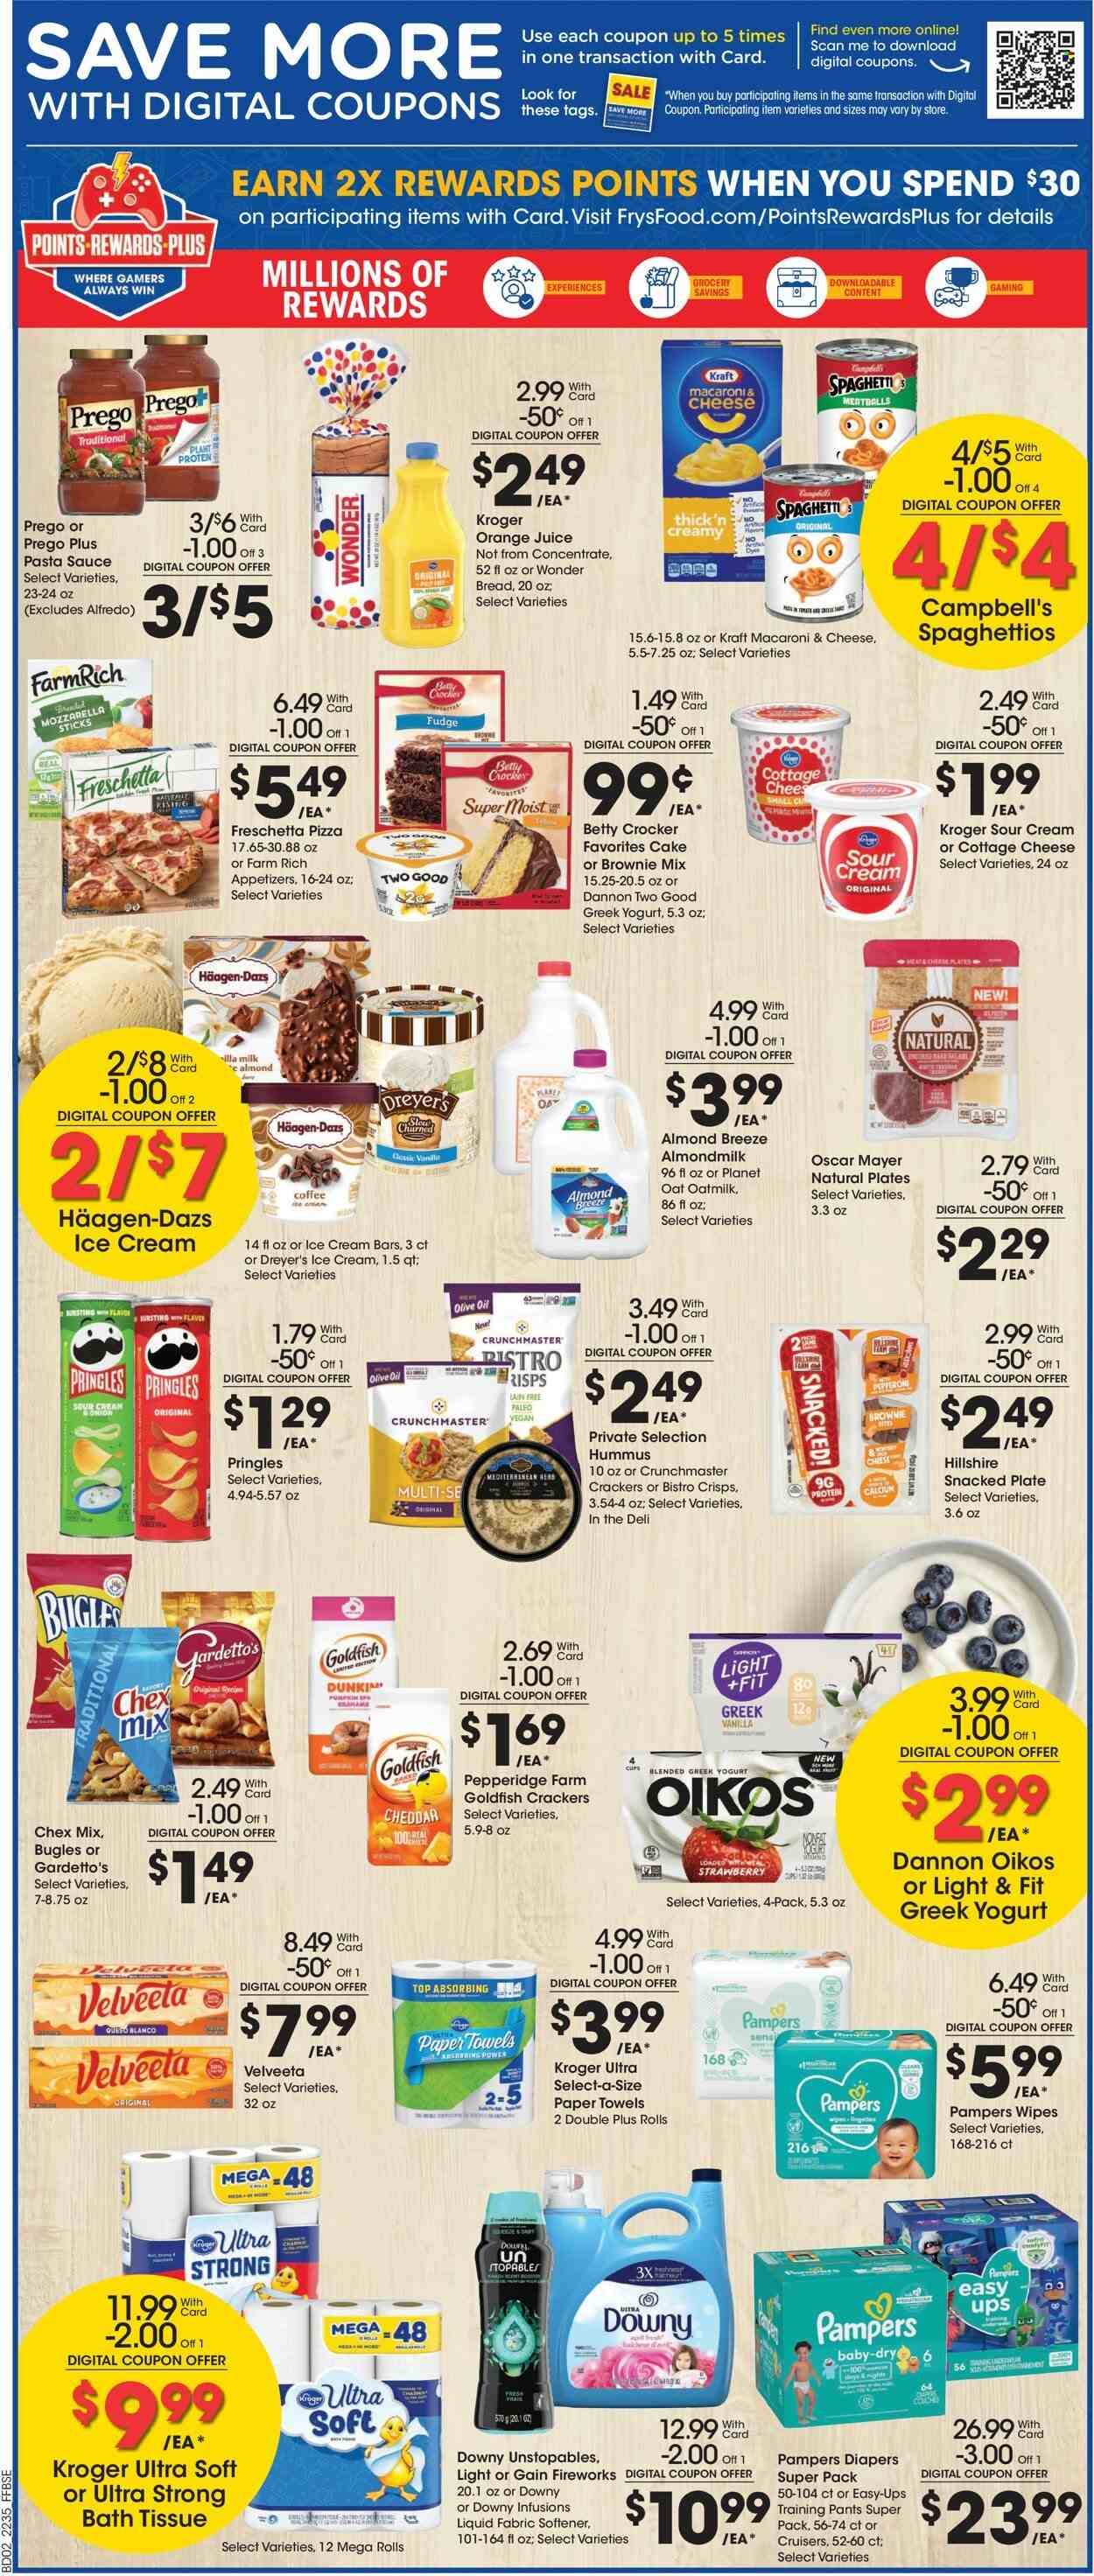 thumbnail - Fry’s Flyer - 09/28/2022 - 10/04/2022 - Sales products - cake, brownie mix, Campbell's, macaroni & cheese, spaghetti, pizza, pasta sauce, meatballs, sauce, Kraft®, salami, Oscar Mayer, pepperoni, hummus, cottage cheese, greek yoghurt, yoghurt, Oikos, Dannon, almond milk, milk, Almond Breeze, oat milk, sour cream, ice cream, ice cream bars, Häagen-Dazs, fudge, crackers, Pringles, Goldfish, Chex Mix, plant protein, olive oil, oil, orange juice, juice, Boost, coffee, wipes, Pampers, pants, nappies, baby pants, bath tissue, kitchen towels, paper towels, Gain, Unstopables, fabric softener, Gain Fireworks, Downy Laundry, Suave, cup, calcium. Page 3.